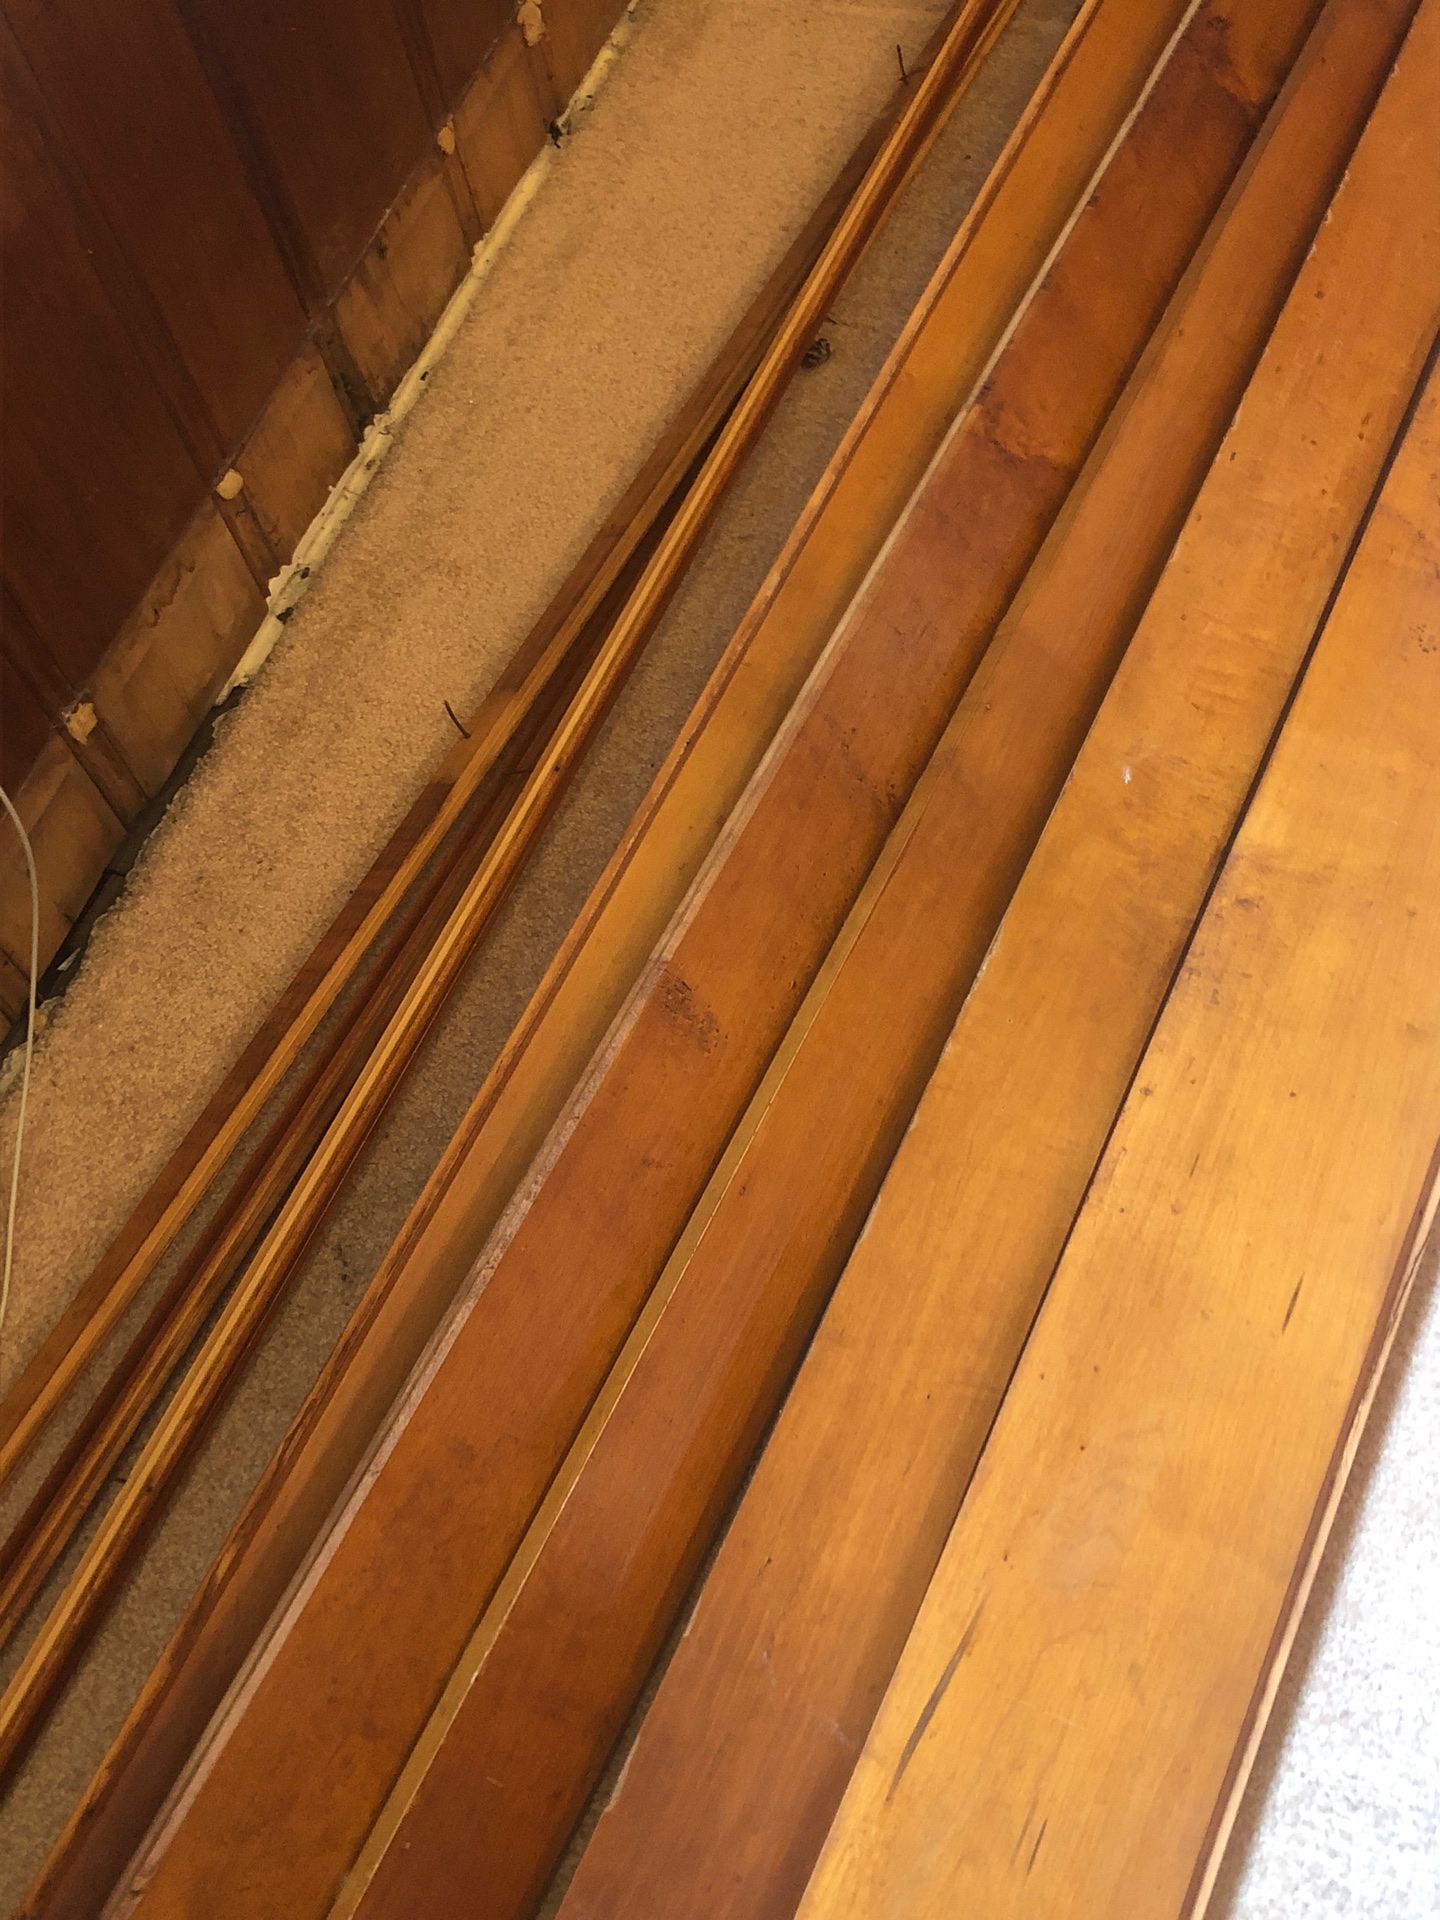 Wood Stained Baseboards - $5